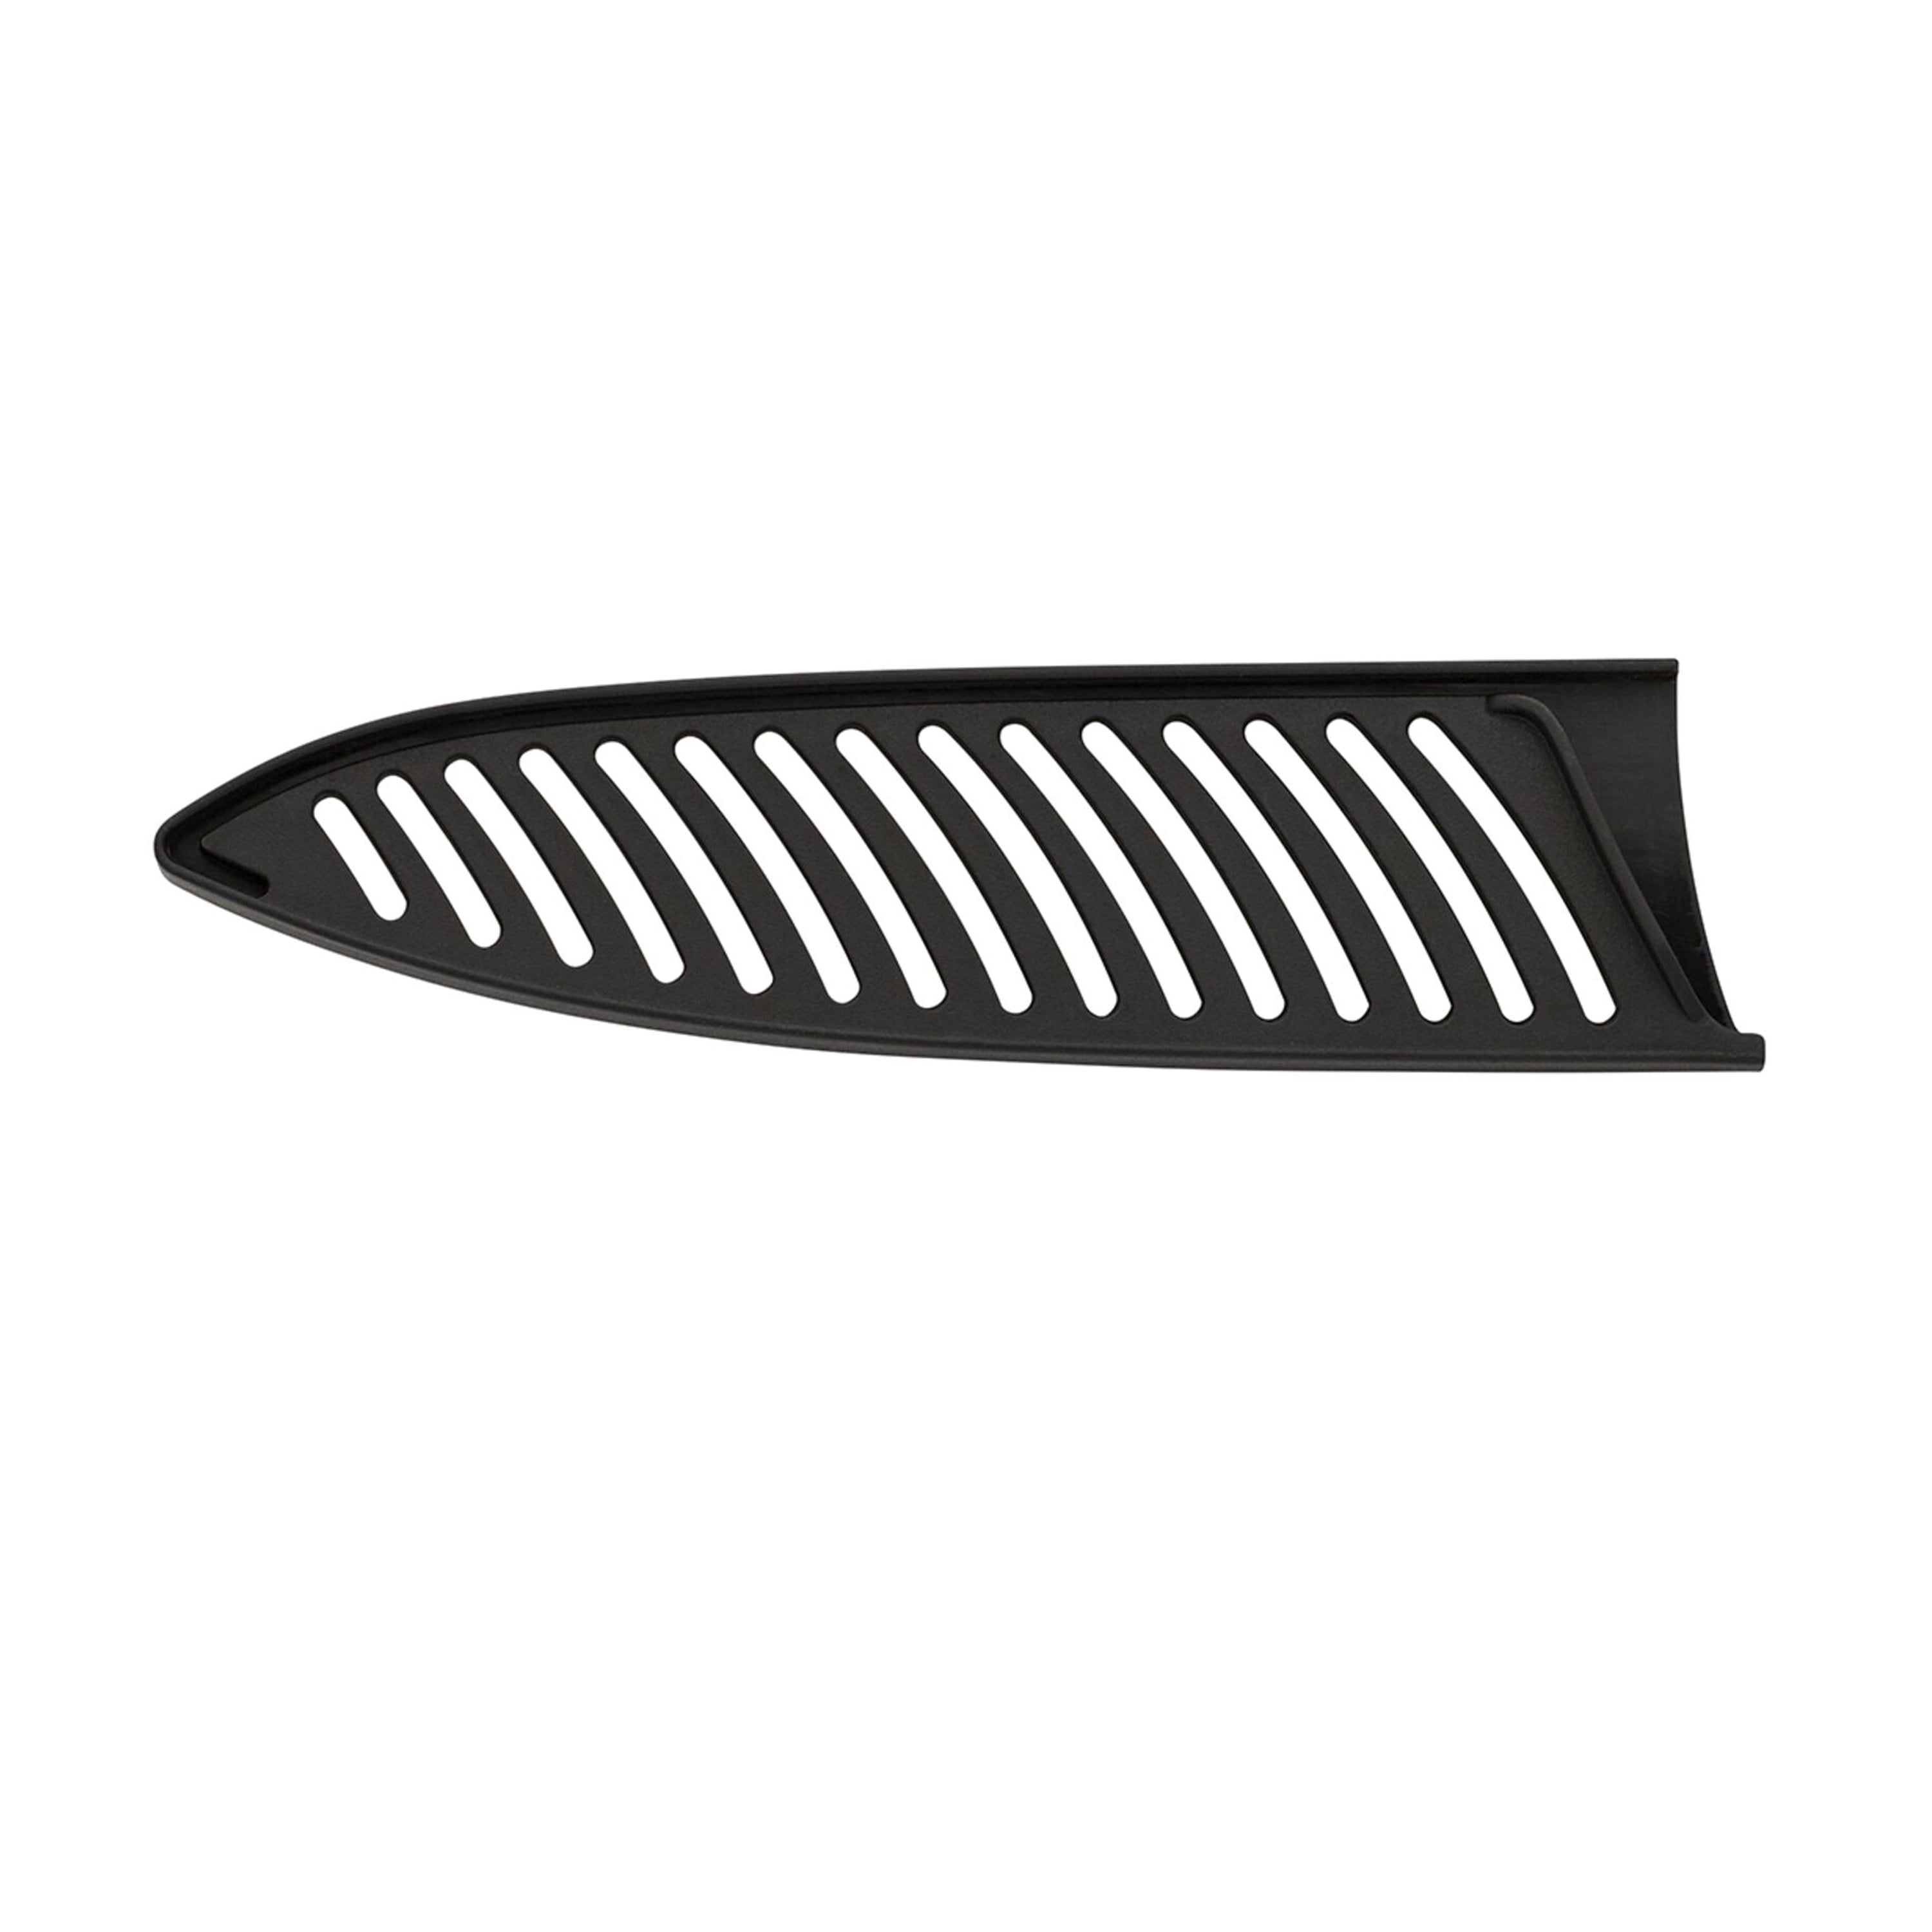 Farberware Professional 3-inch Ceramic Paring Knife with Black Blade Cover  and Handle 